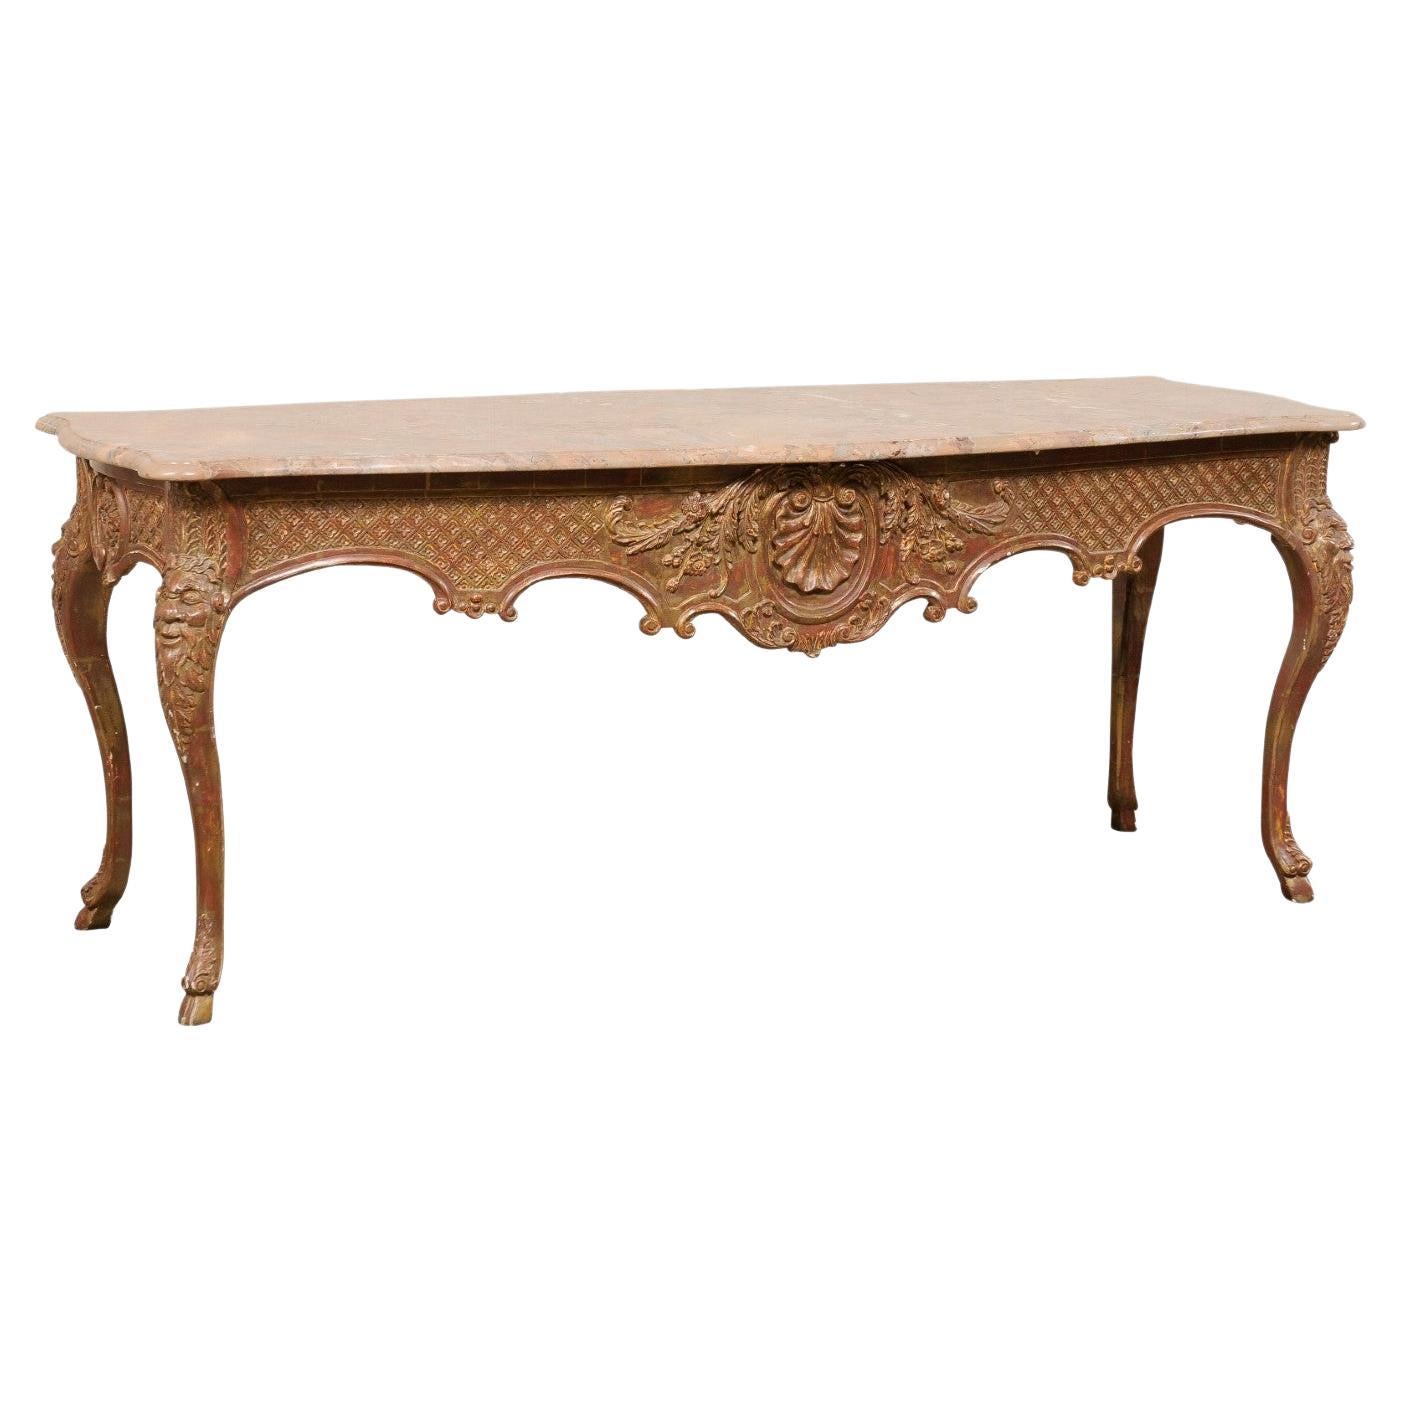 French Marble Top Center Table- Elaborately Carved & Textured